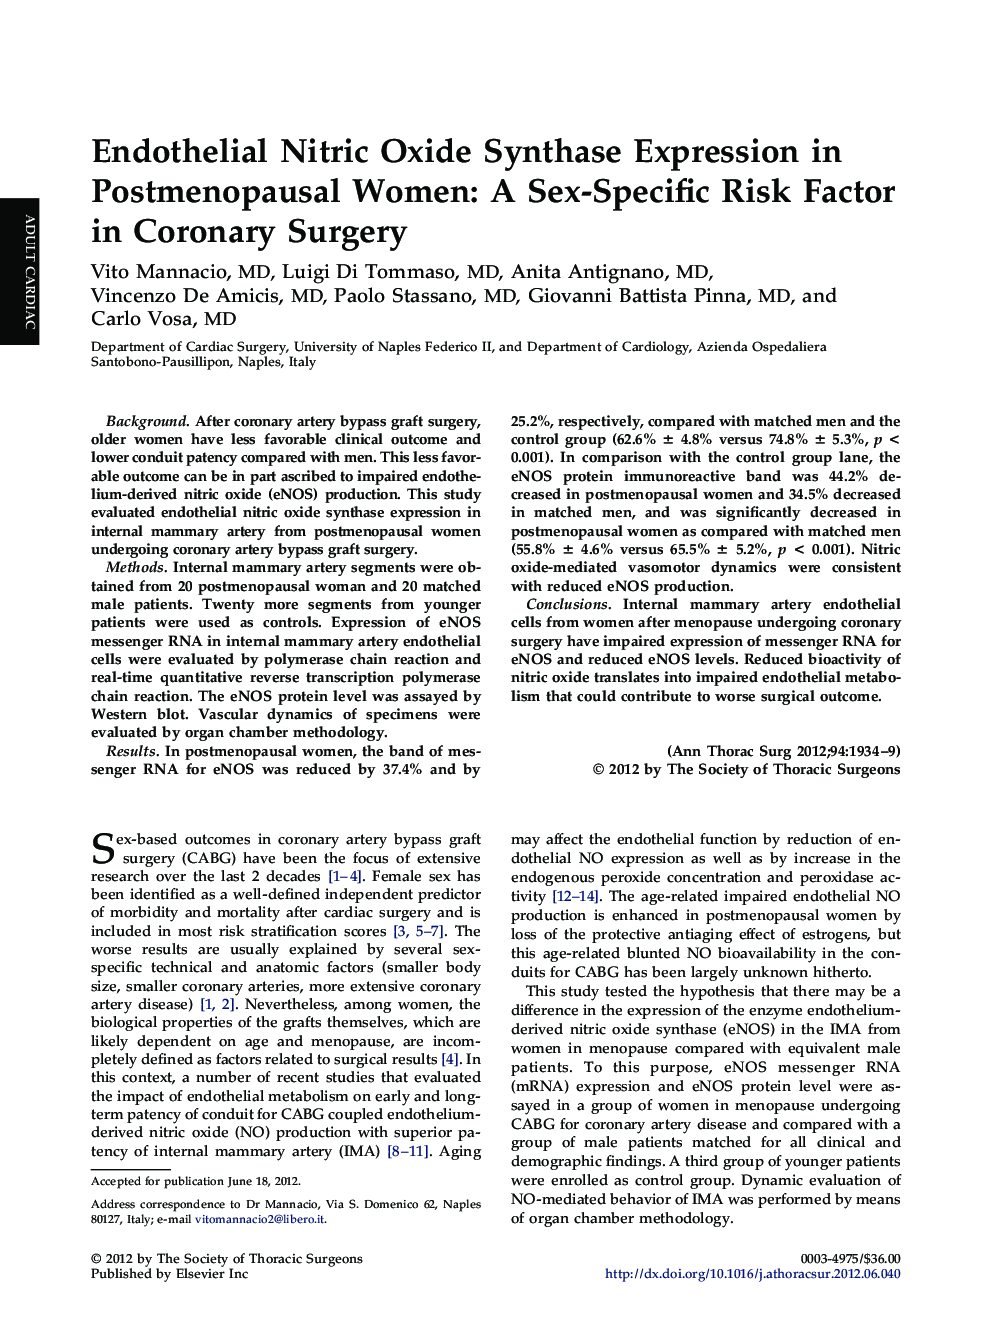 Endothelial Nitric Oxide Synthase Expression in Postmenopausal Women: A Sex-Specific Risk Factor in Coronary Surgery